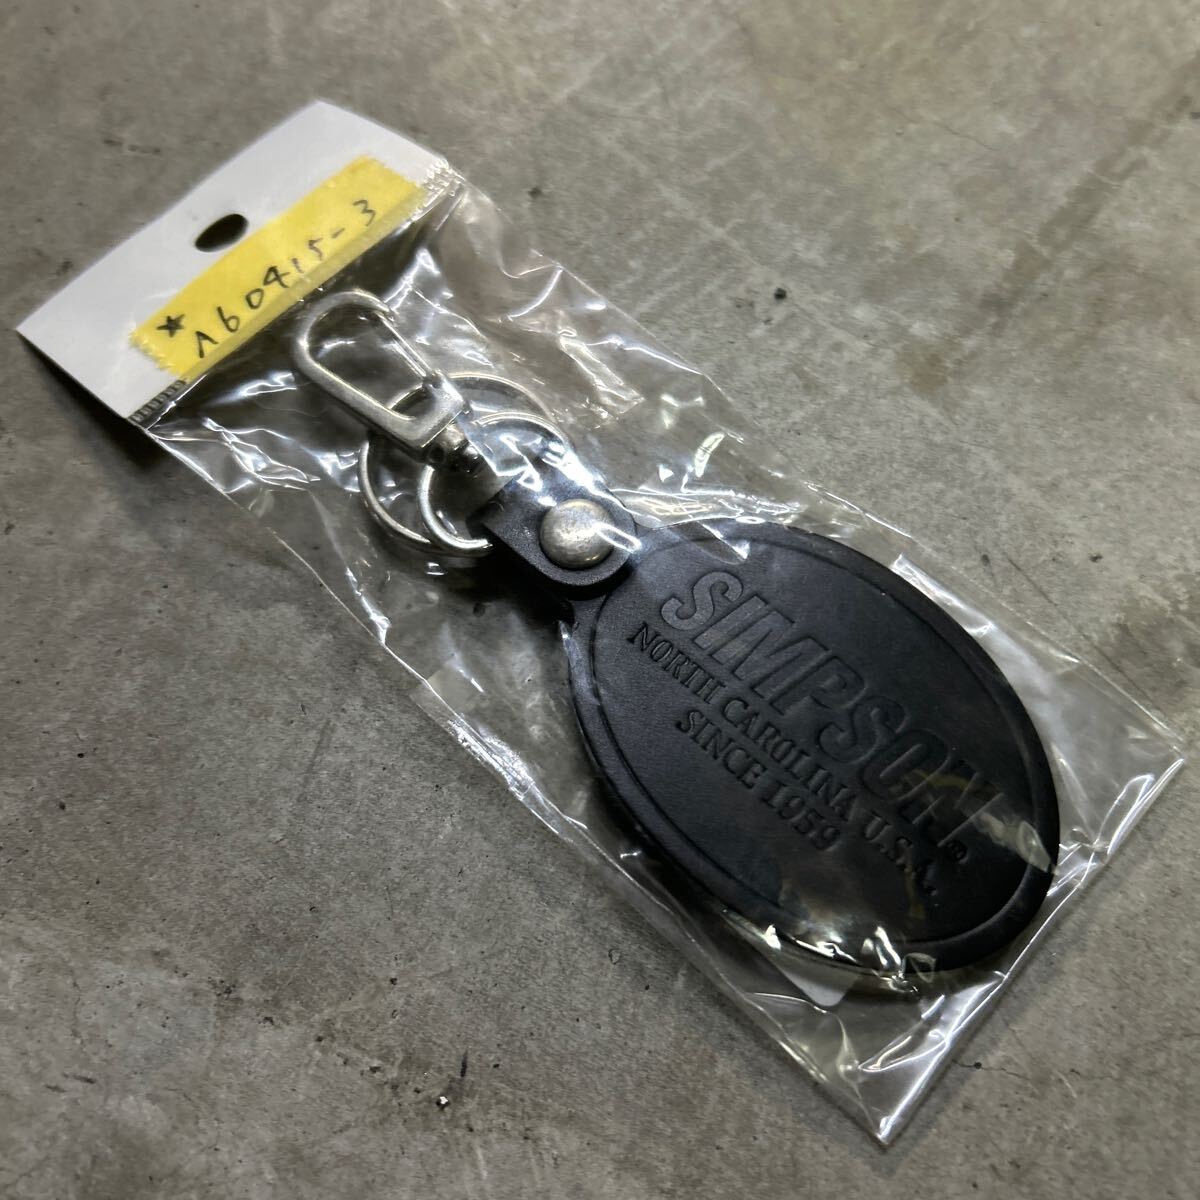 * outlet liquidation SIMPSON SK-12 BLACK Simpson kalabina attaching key holder bike accessory small articles new goods records out of production goods A60415-3